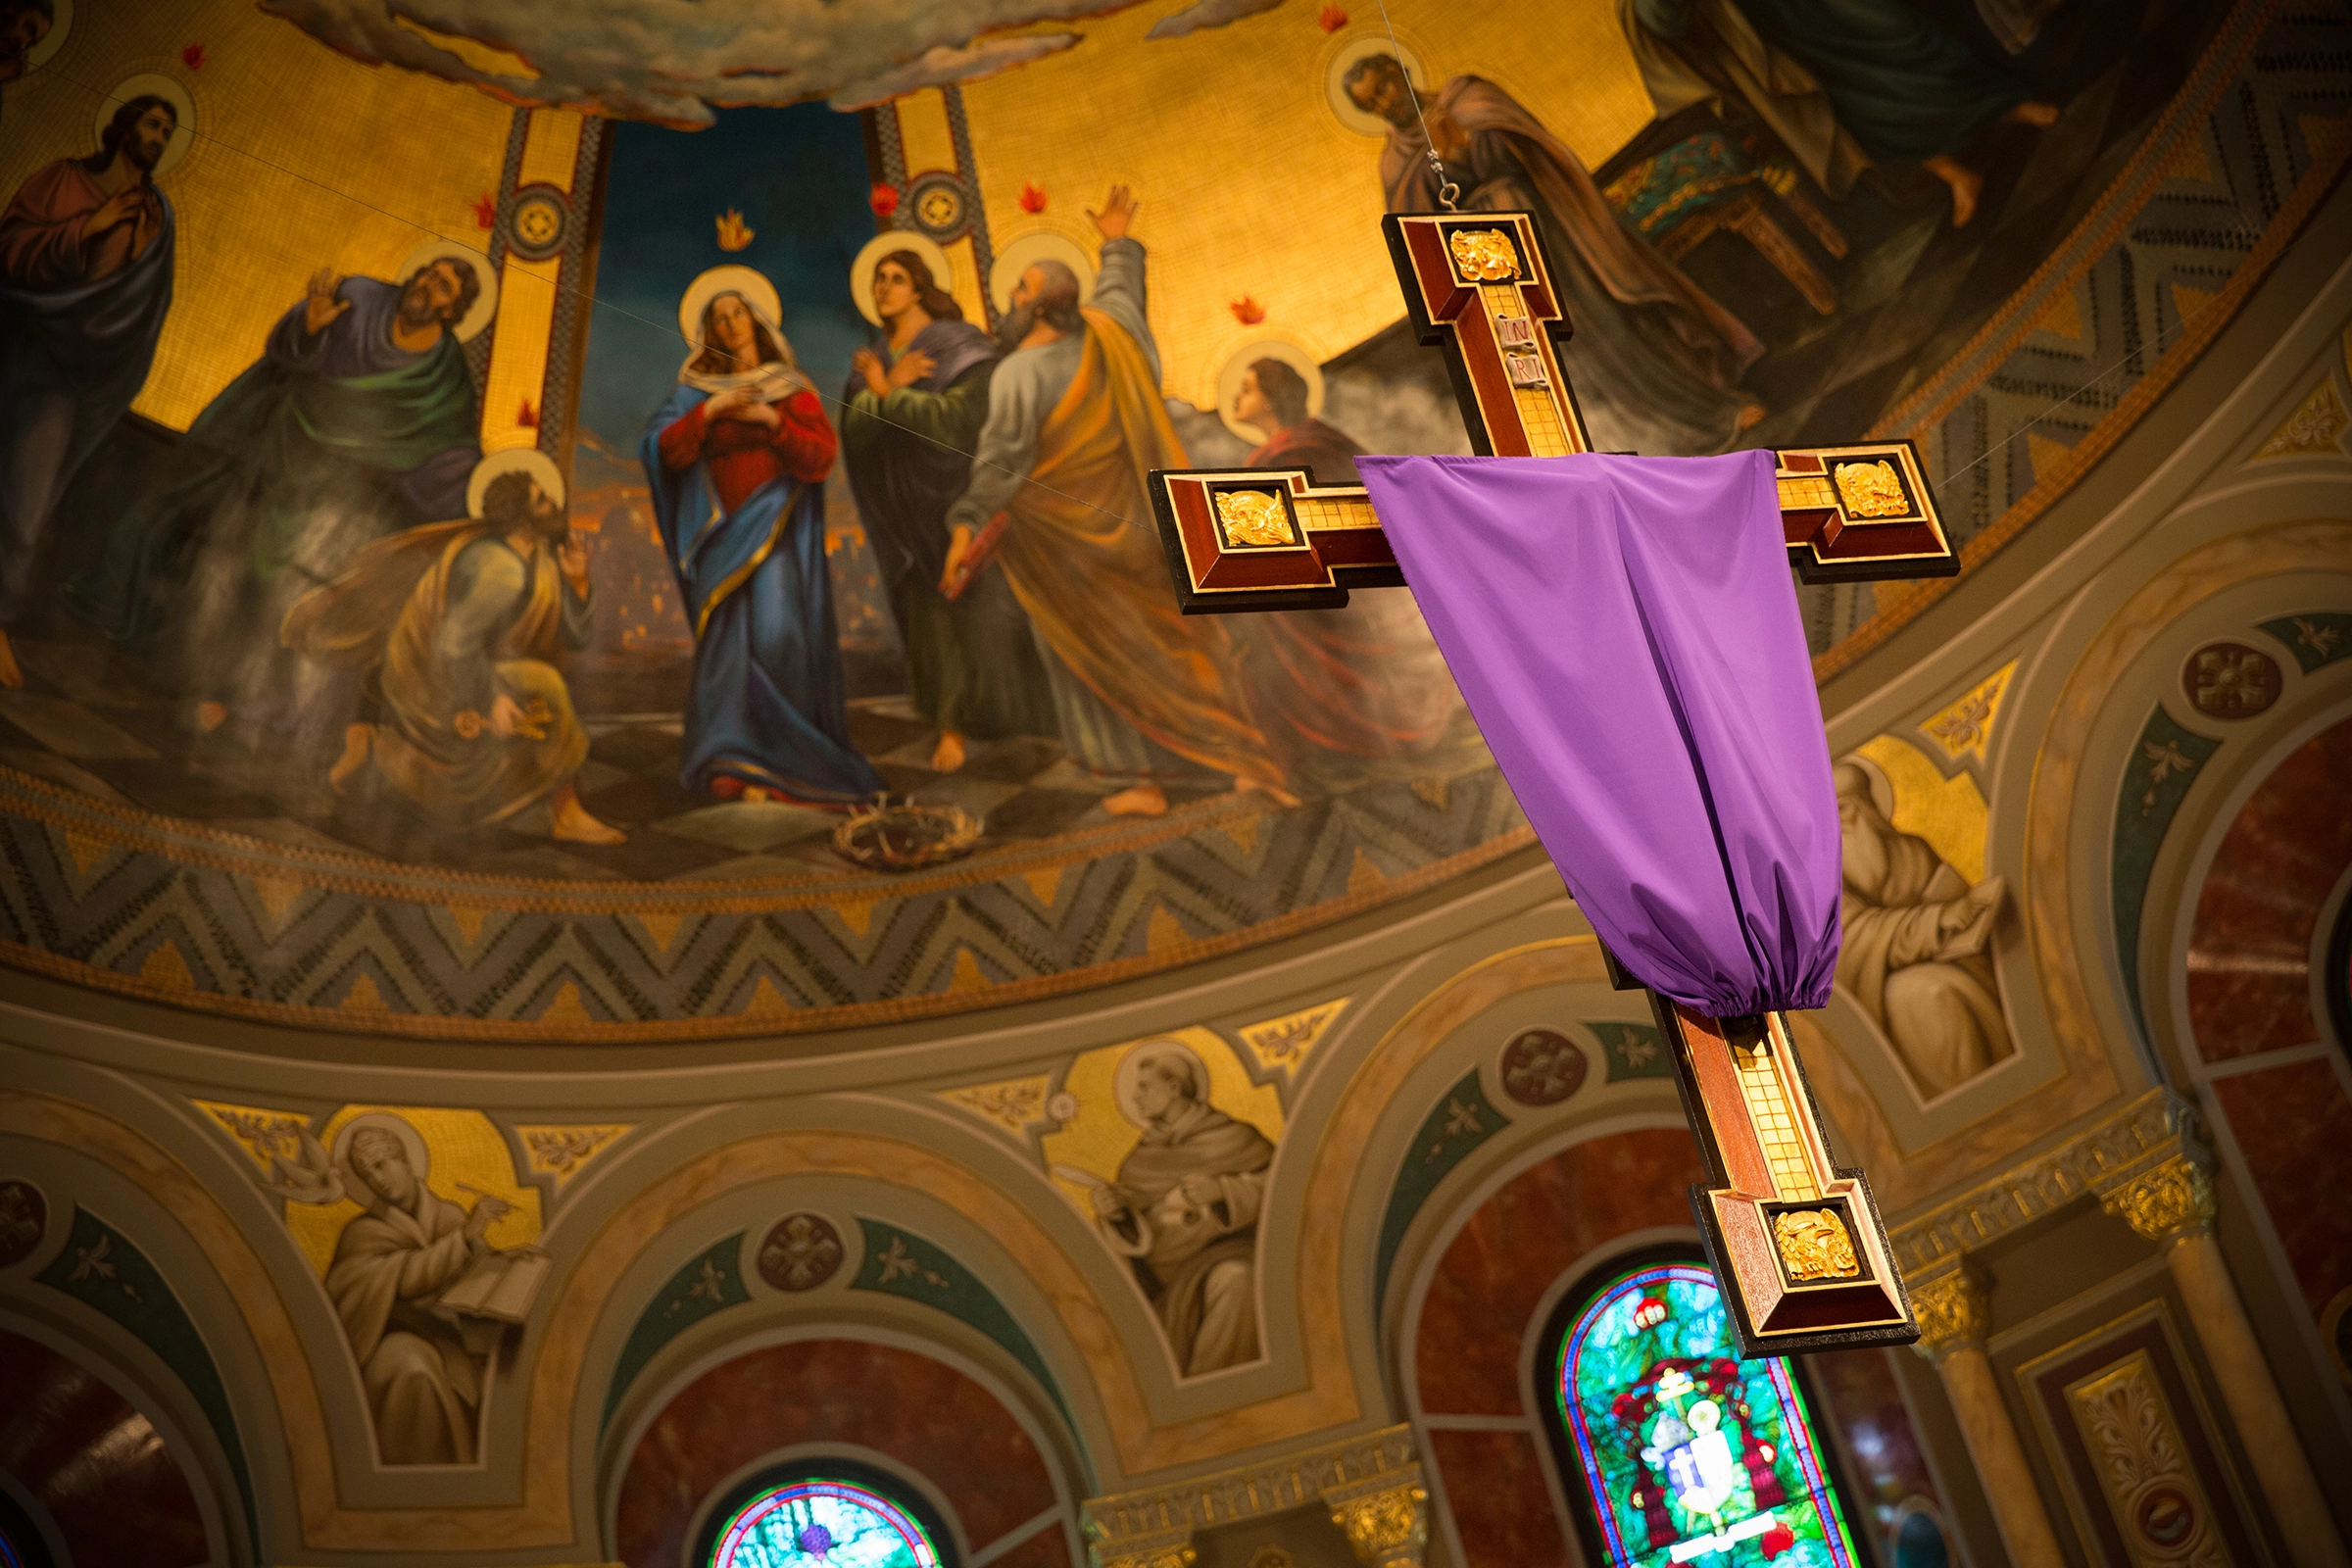 Why the catholic church covers crosses and images during lent